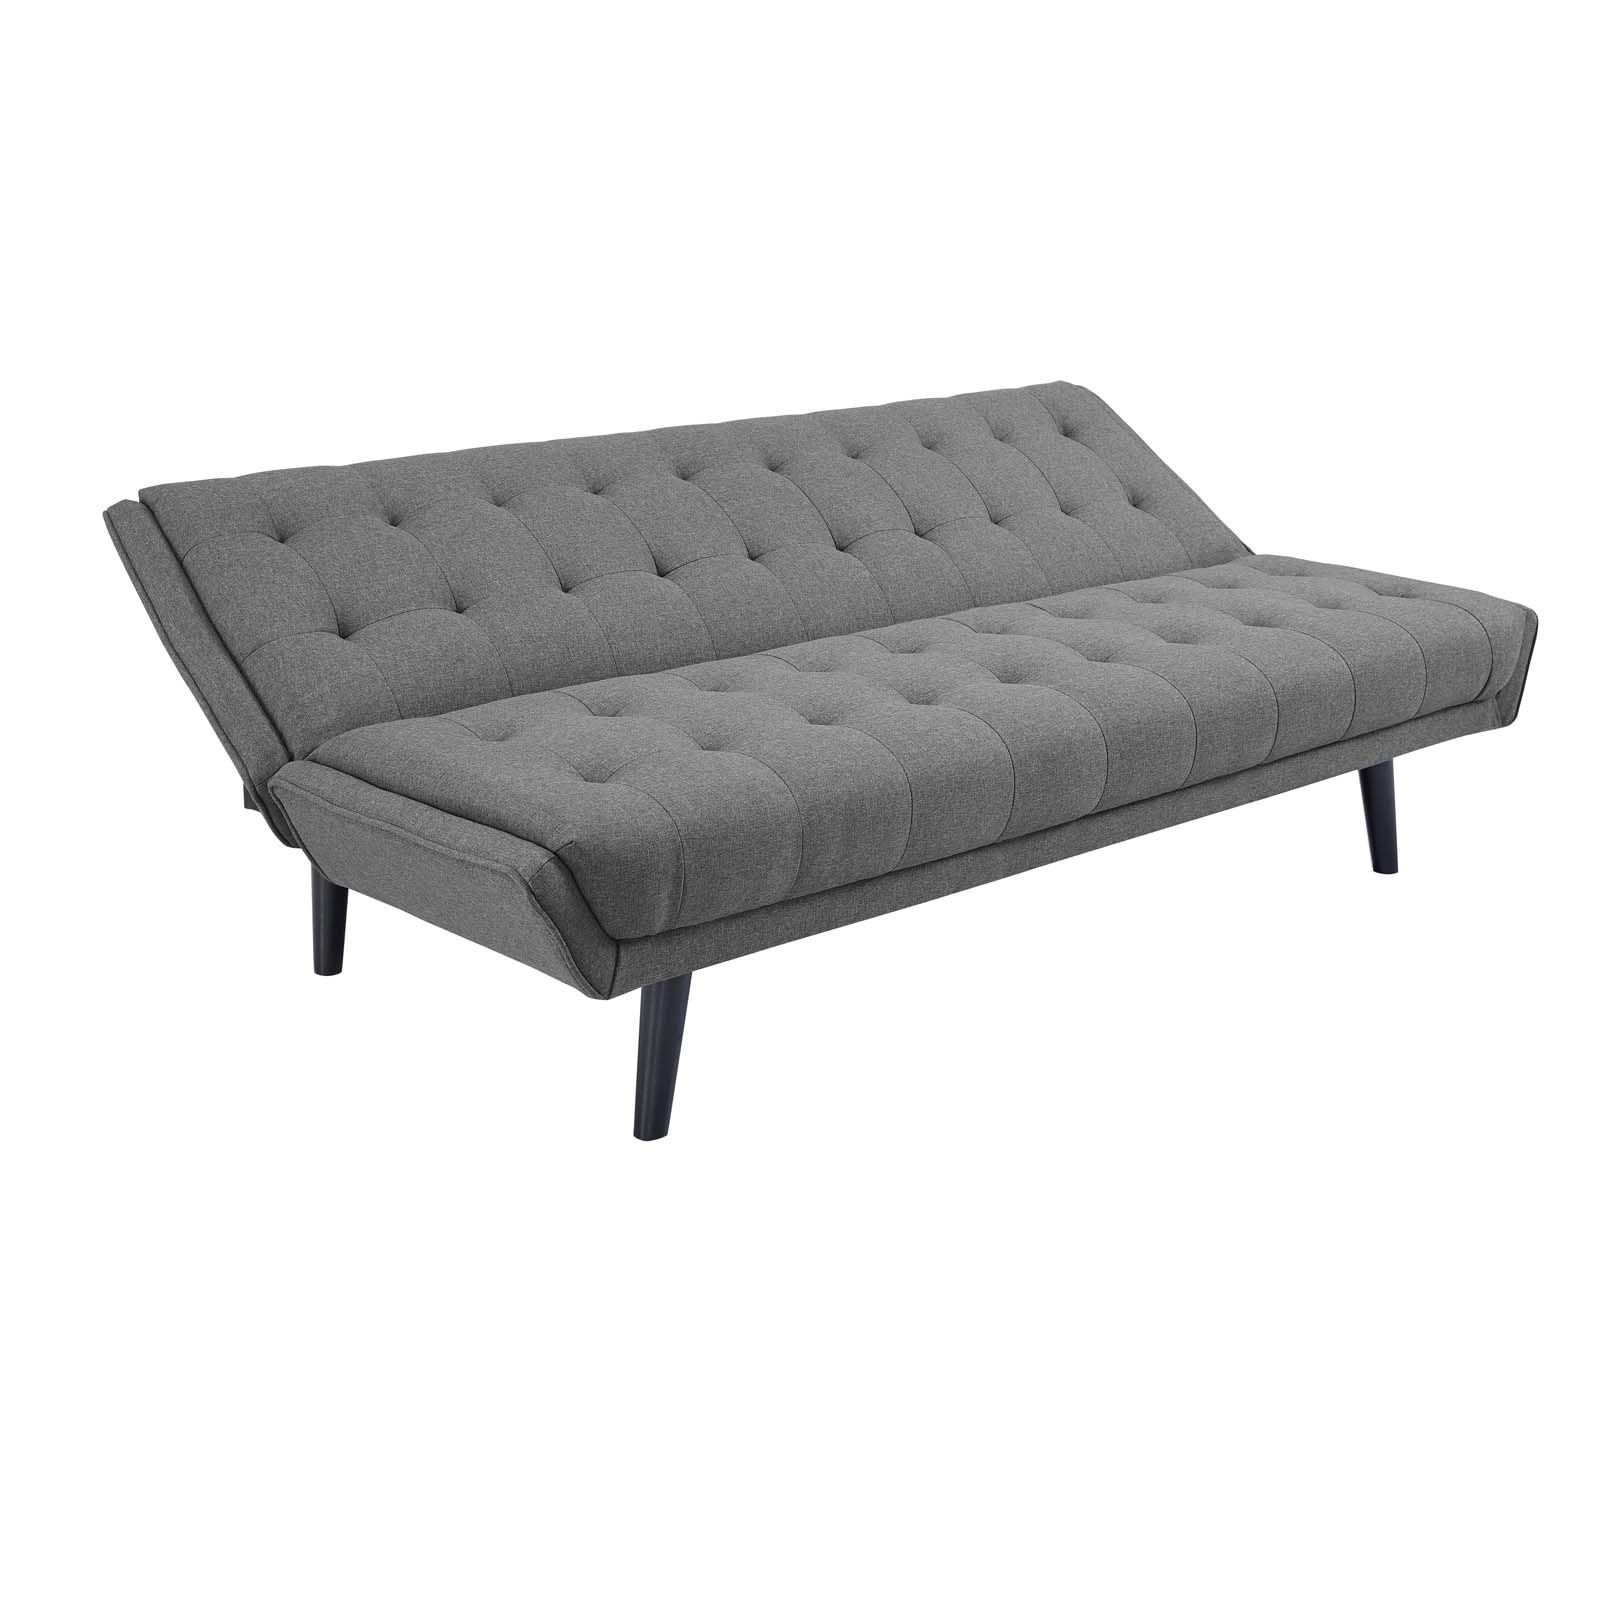 Glance Tufted Convertible Fabric Sofa Bed Gray In Tufted Convertible Sleeper Sofas (View 8 of 20)